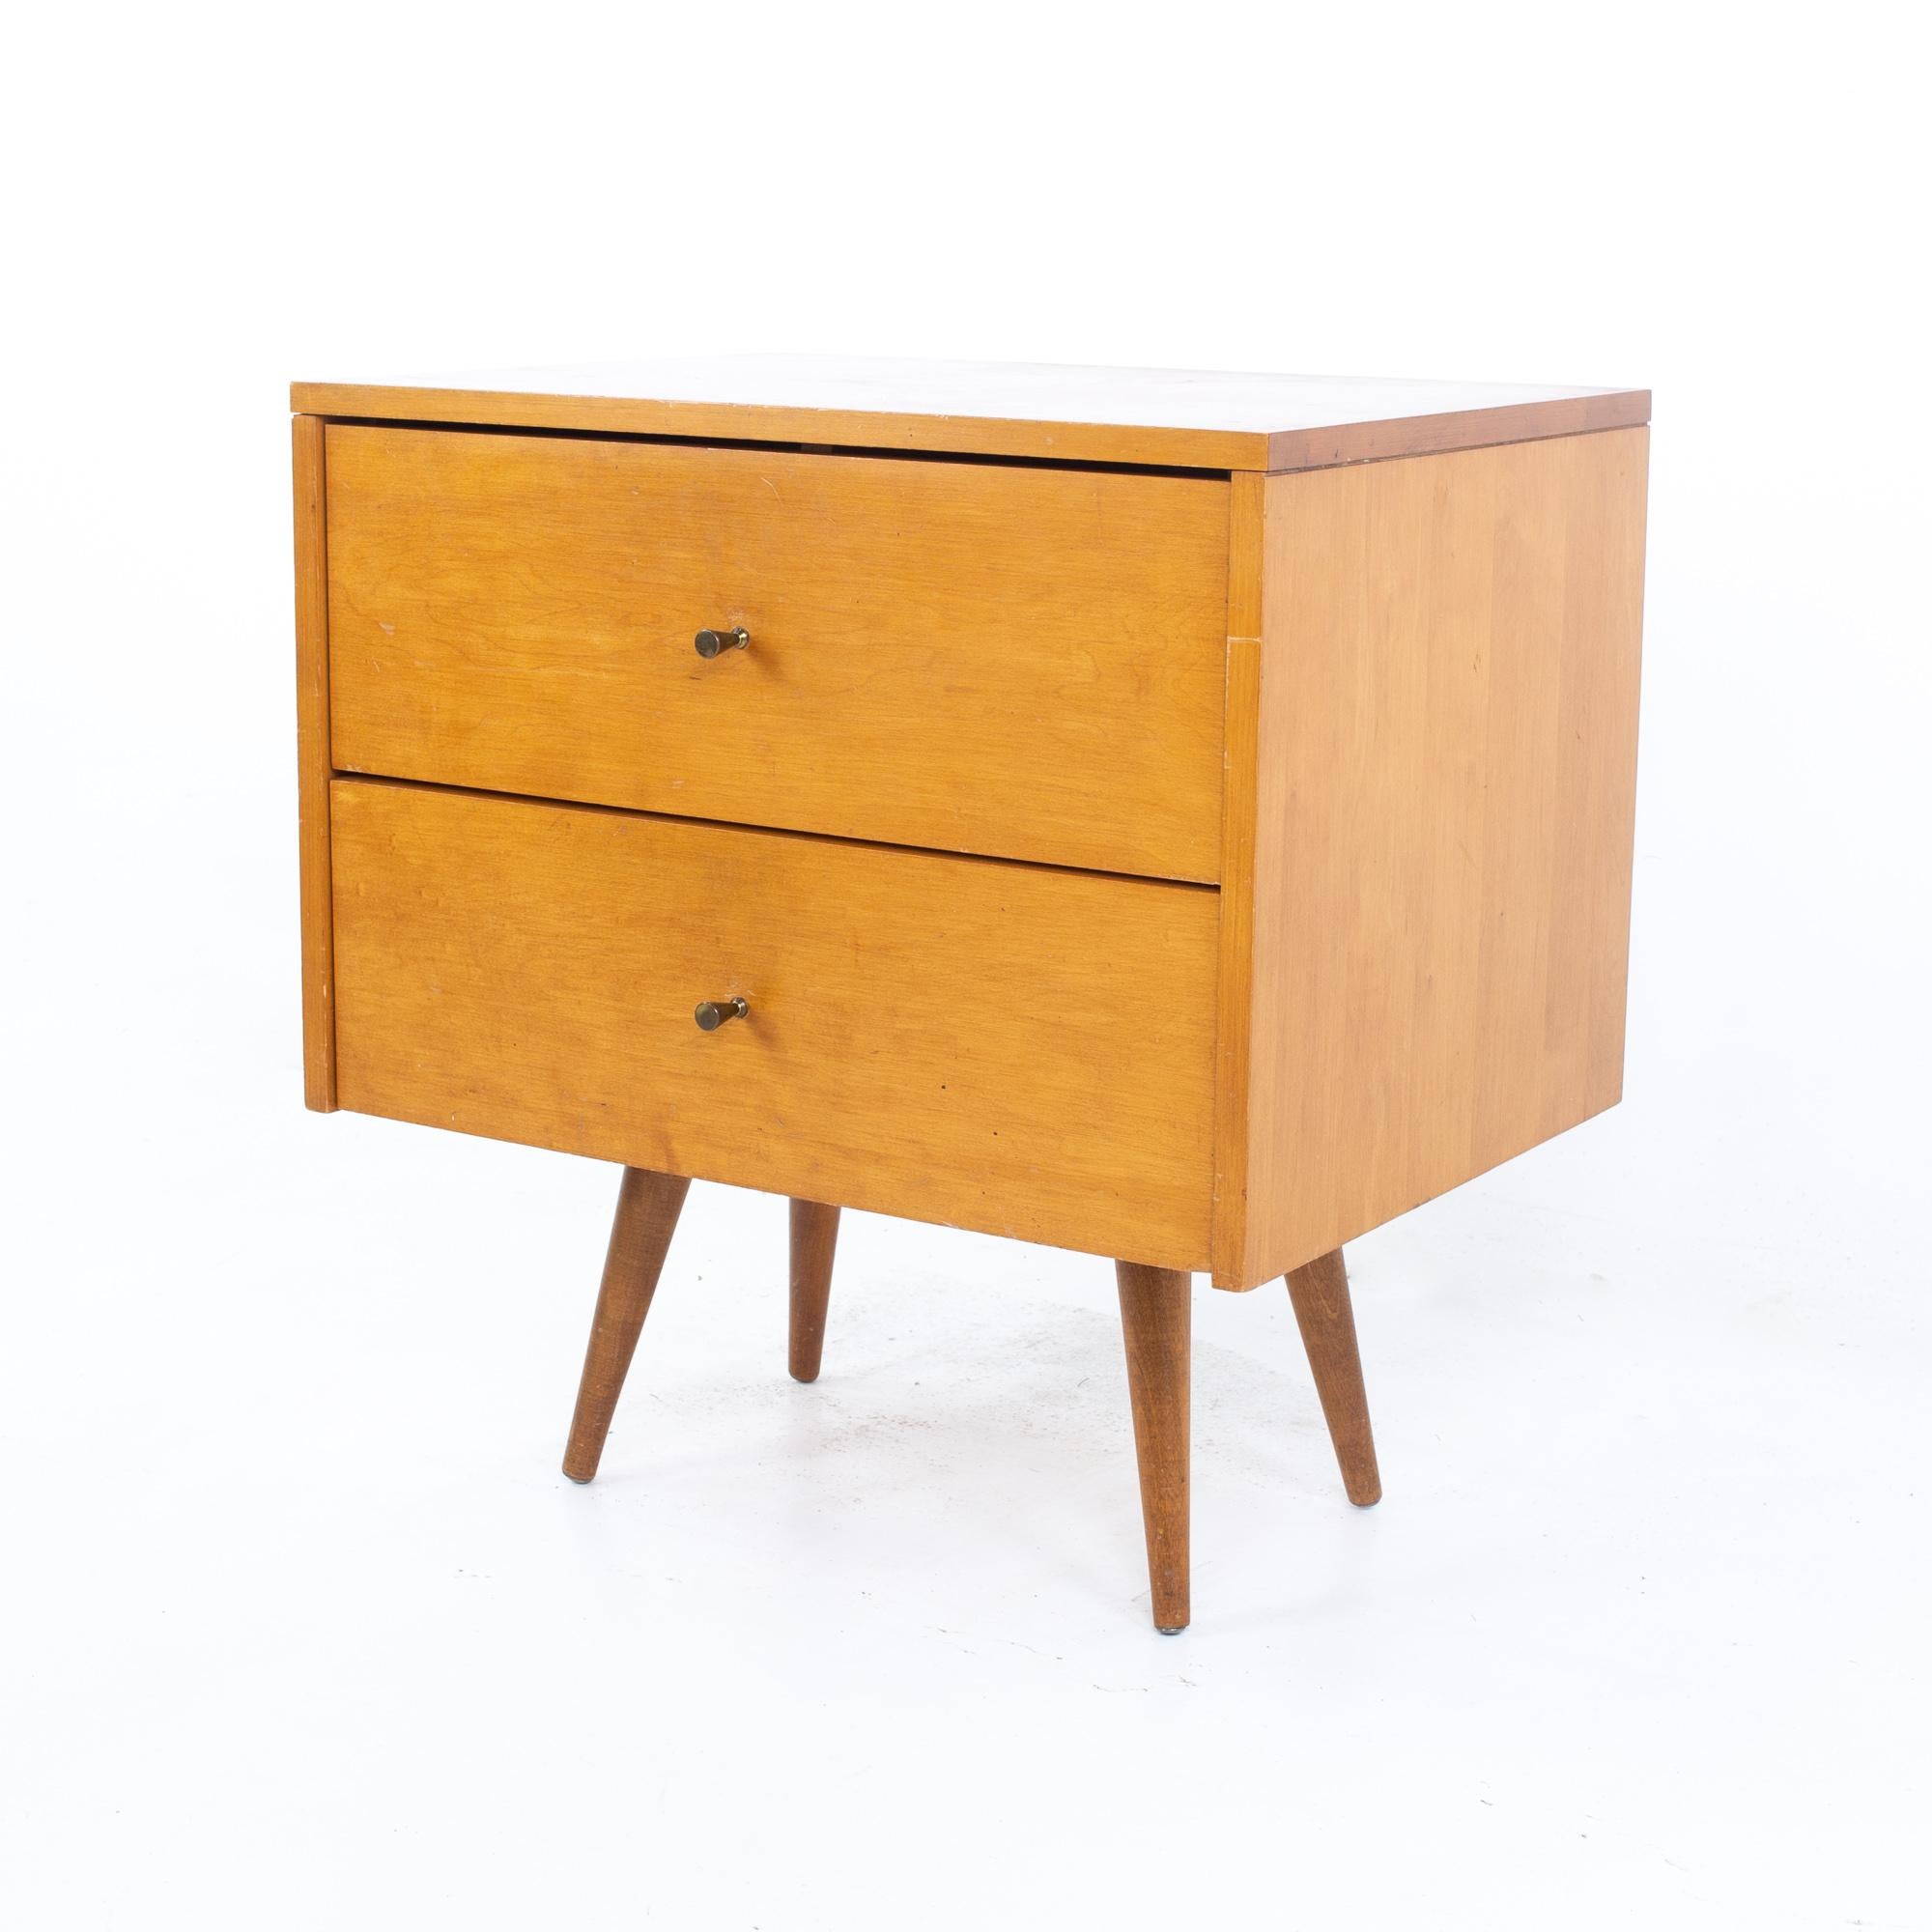 Paul McCobb Planner Group mid century 2 drawer nightstand
Nightstand measures: 24 wide x 18 deep x 25.75 inches high

All pieces of furniture can be had in what we call restored vintage condition. That means the piece is restored upon purchase so